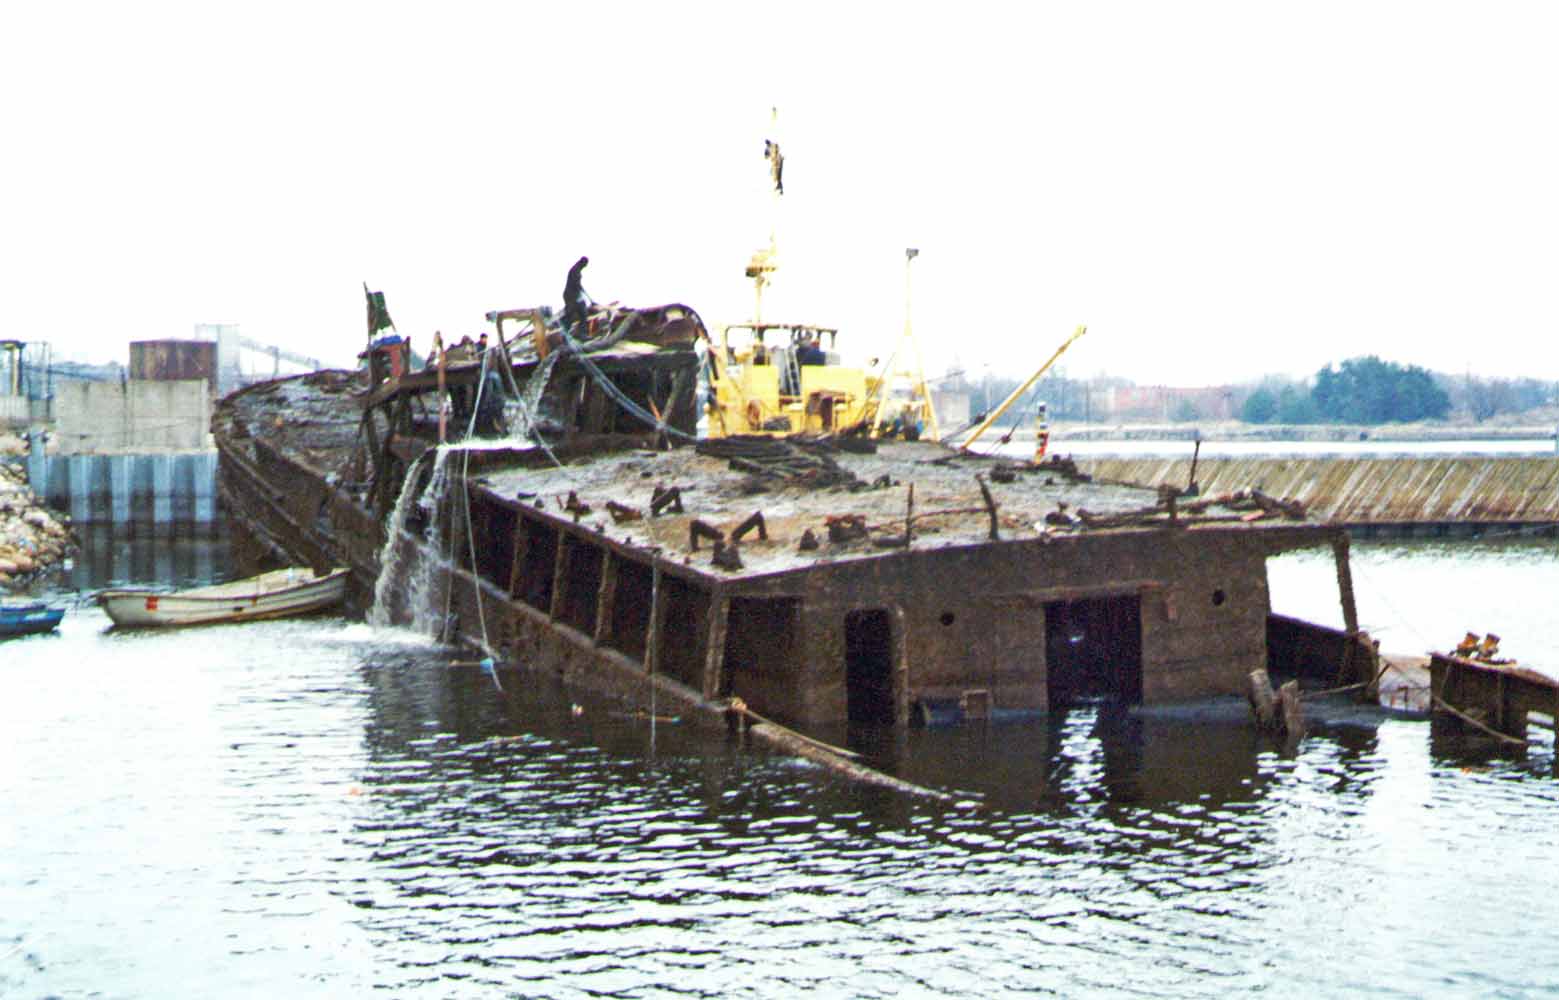 Sunken Floating Workshop Lifted out of Water